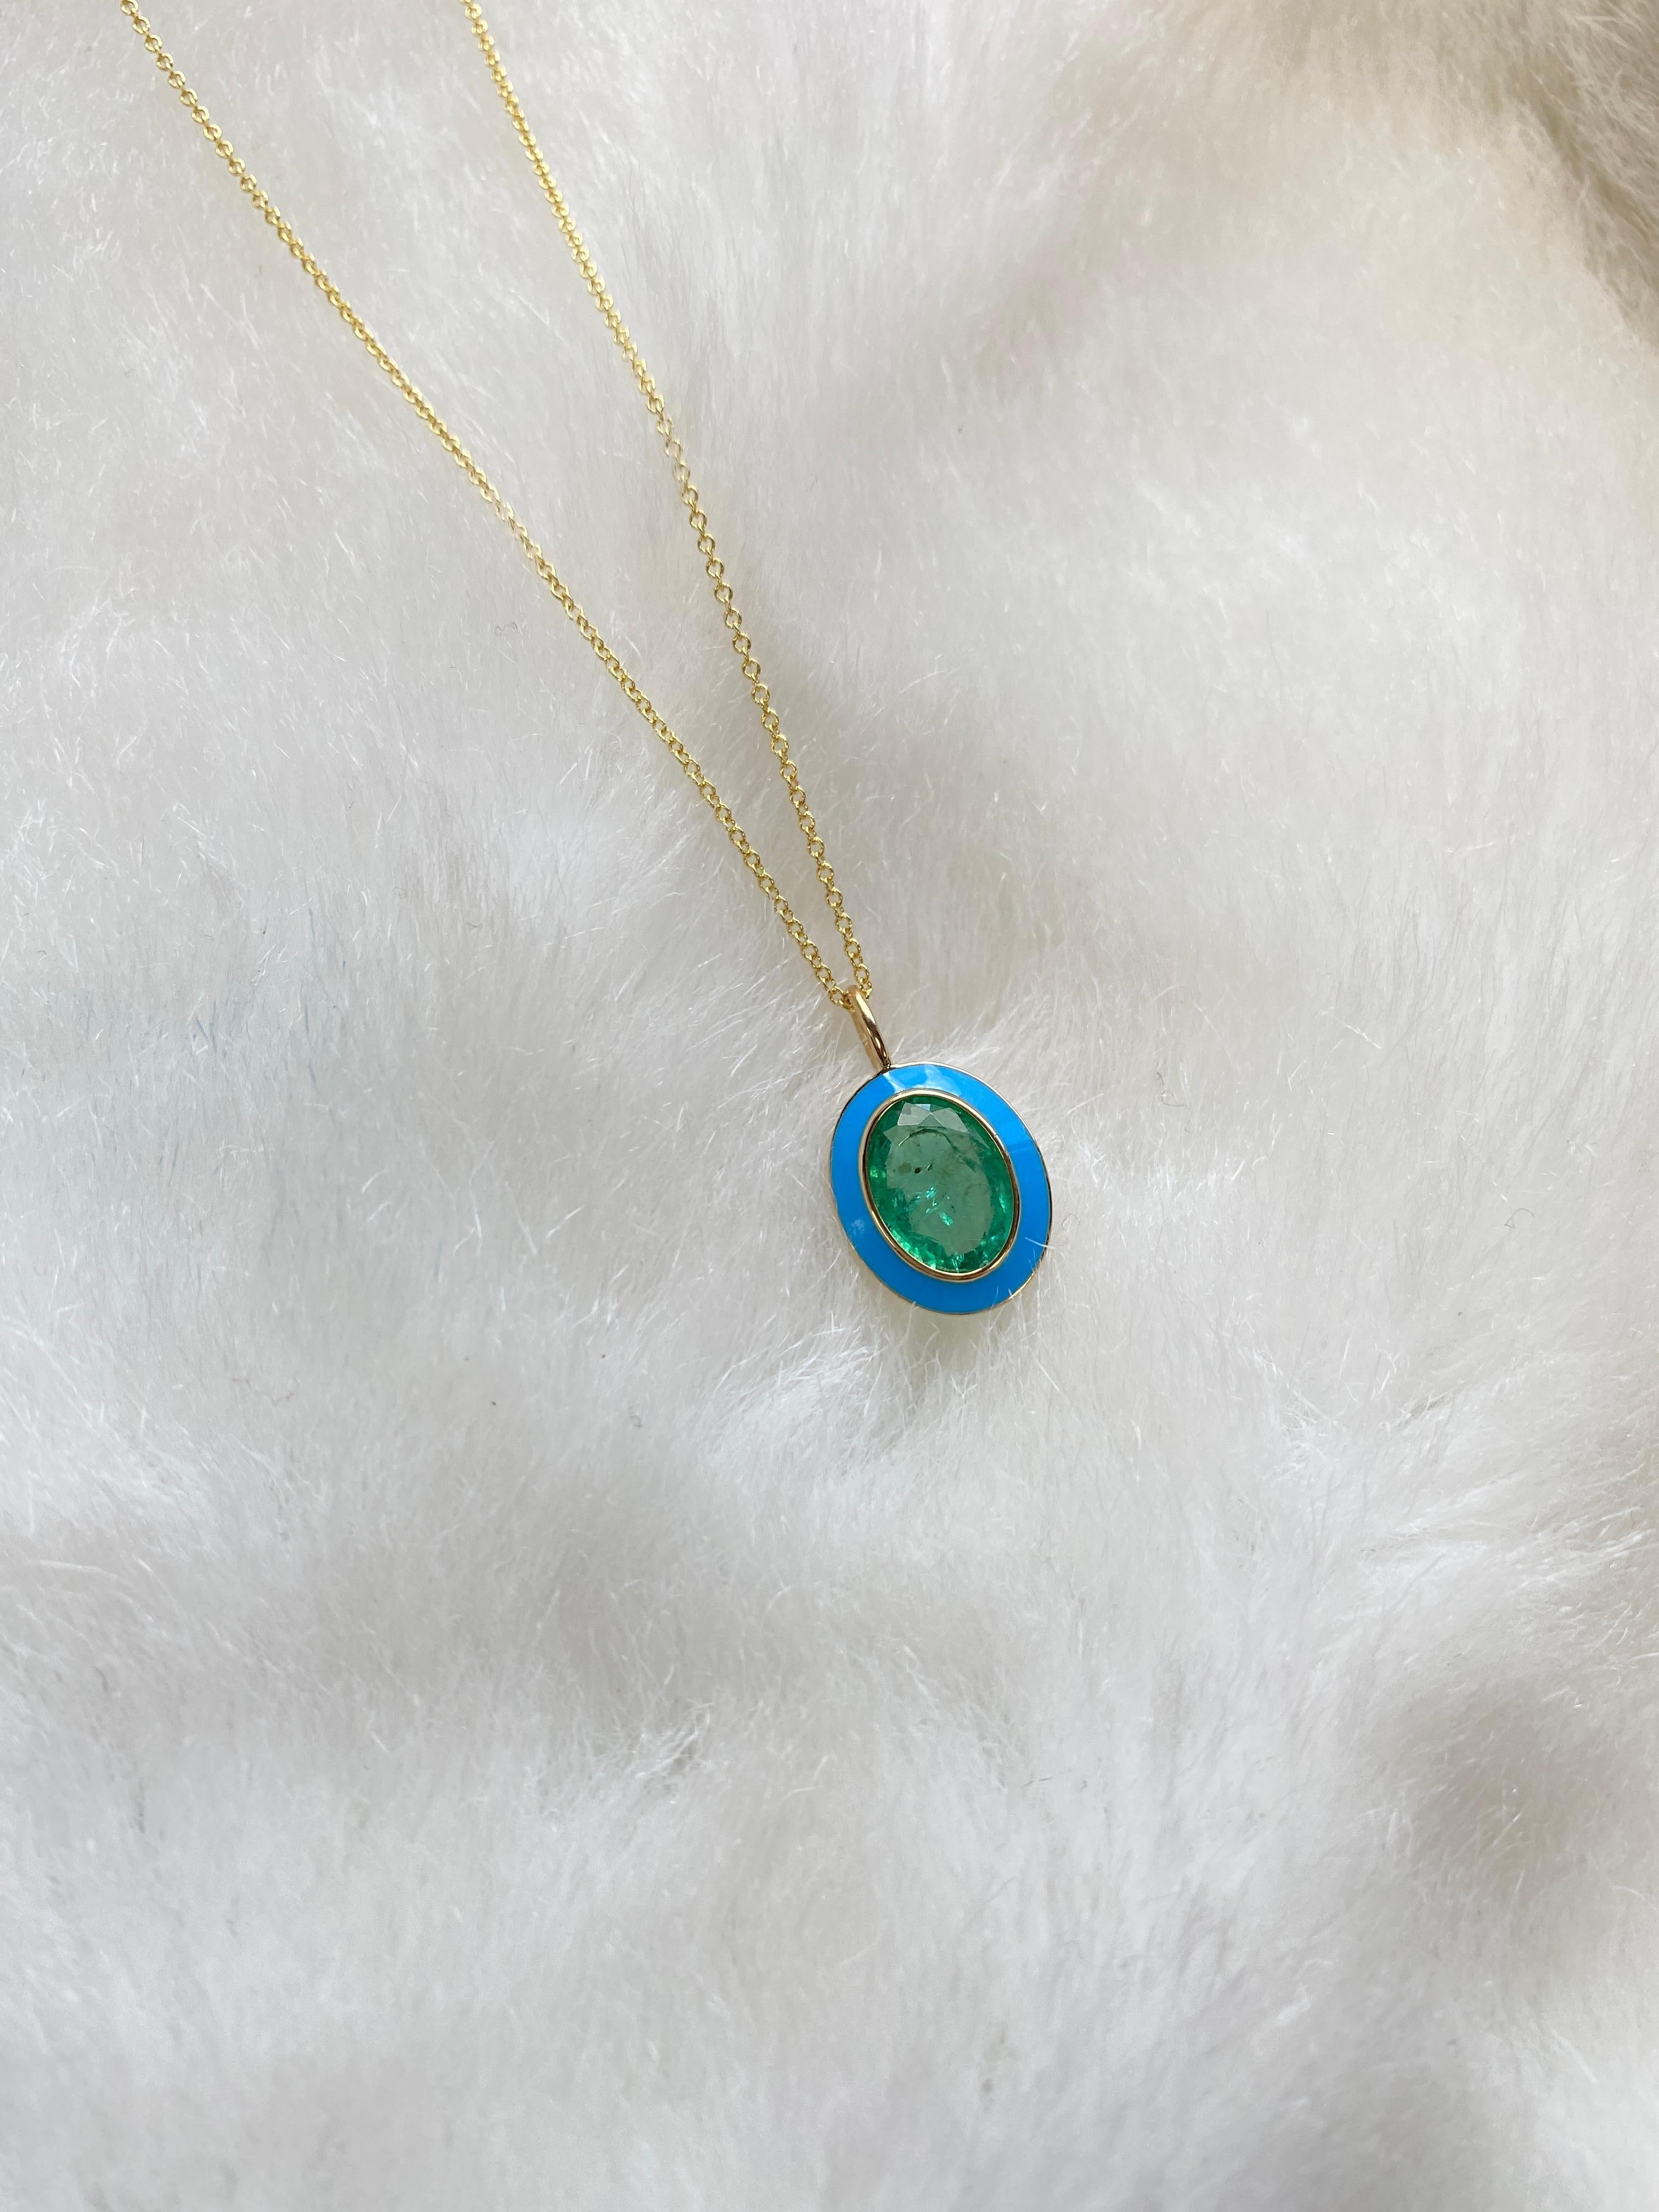 Emerald Oval Pendant with Turquoise Enamel in 18K Yellow Gold, from 'Queen' Collection. The combination of enamel, and Emerald represents power, richness and passion of a true Queen. The feeling of luxury is what we’re aiming for, but at a price